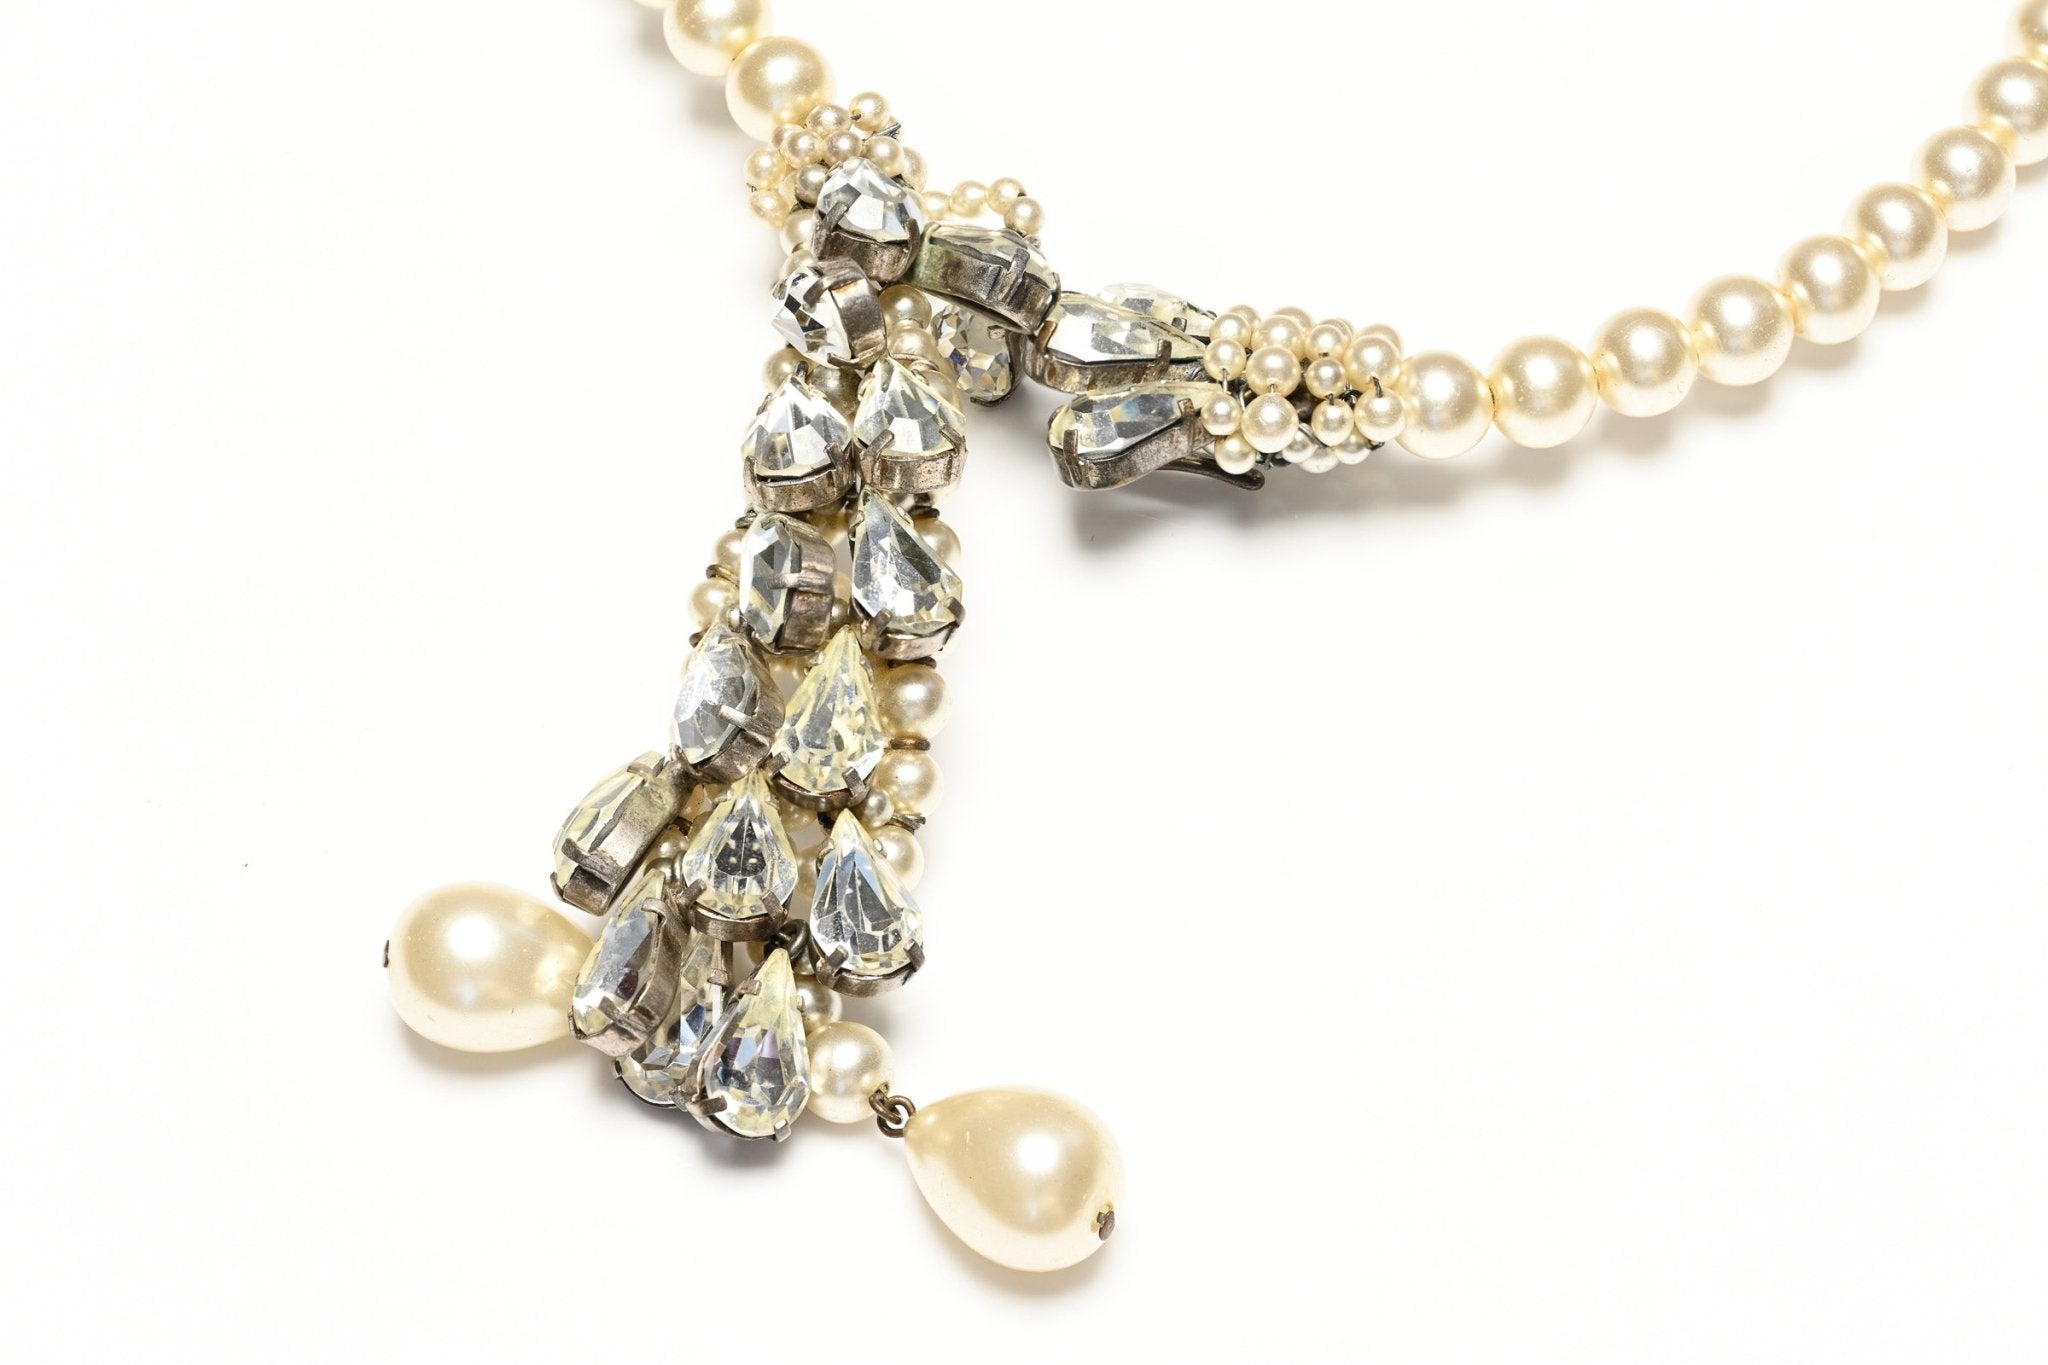 Christian Dior 1950's Haute Couture Roger Scemama Pearl Crystal Collar Necklace - DSF Antique Jewelry